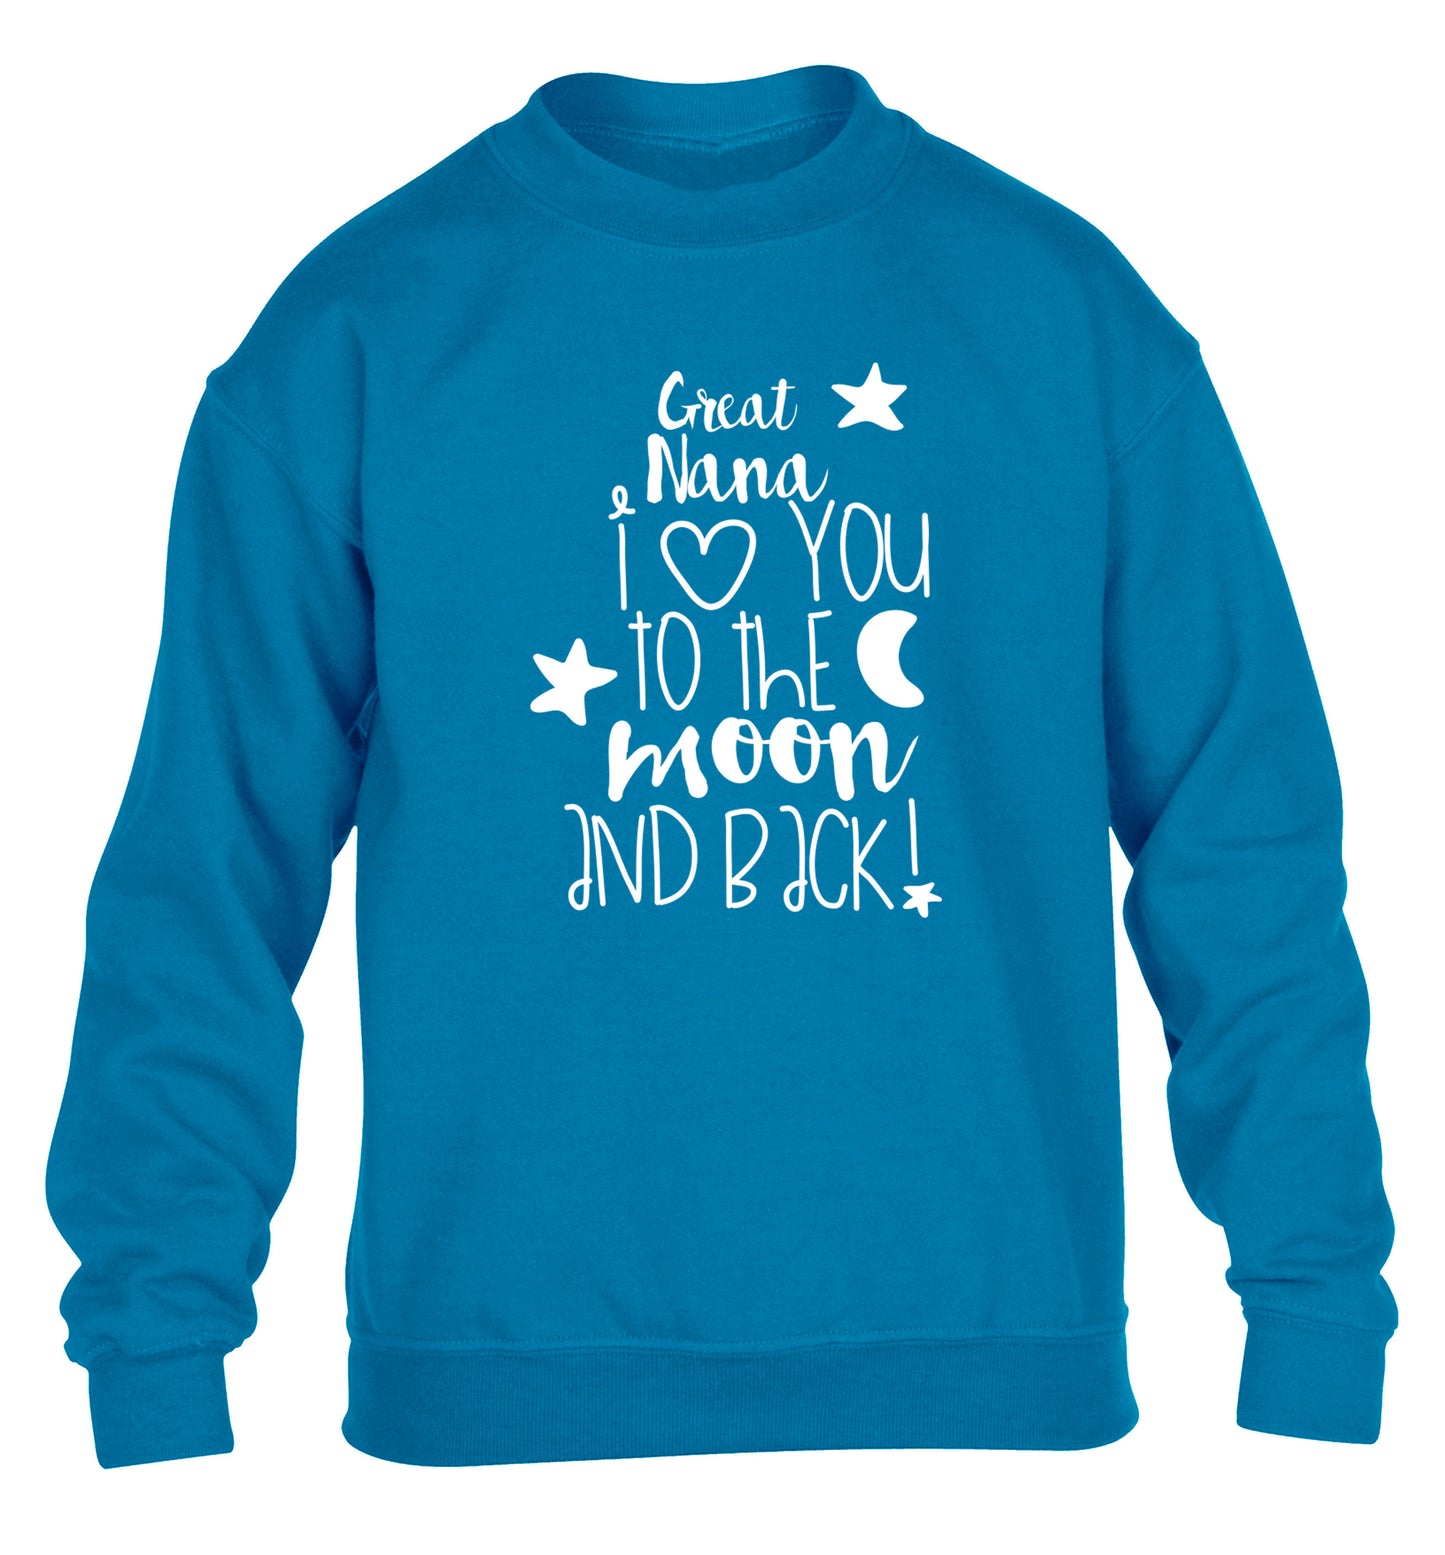 Great Nana I love you to the moon and back children's blue  sweater 12-14 Years